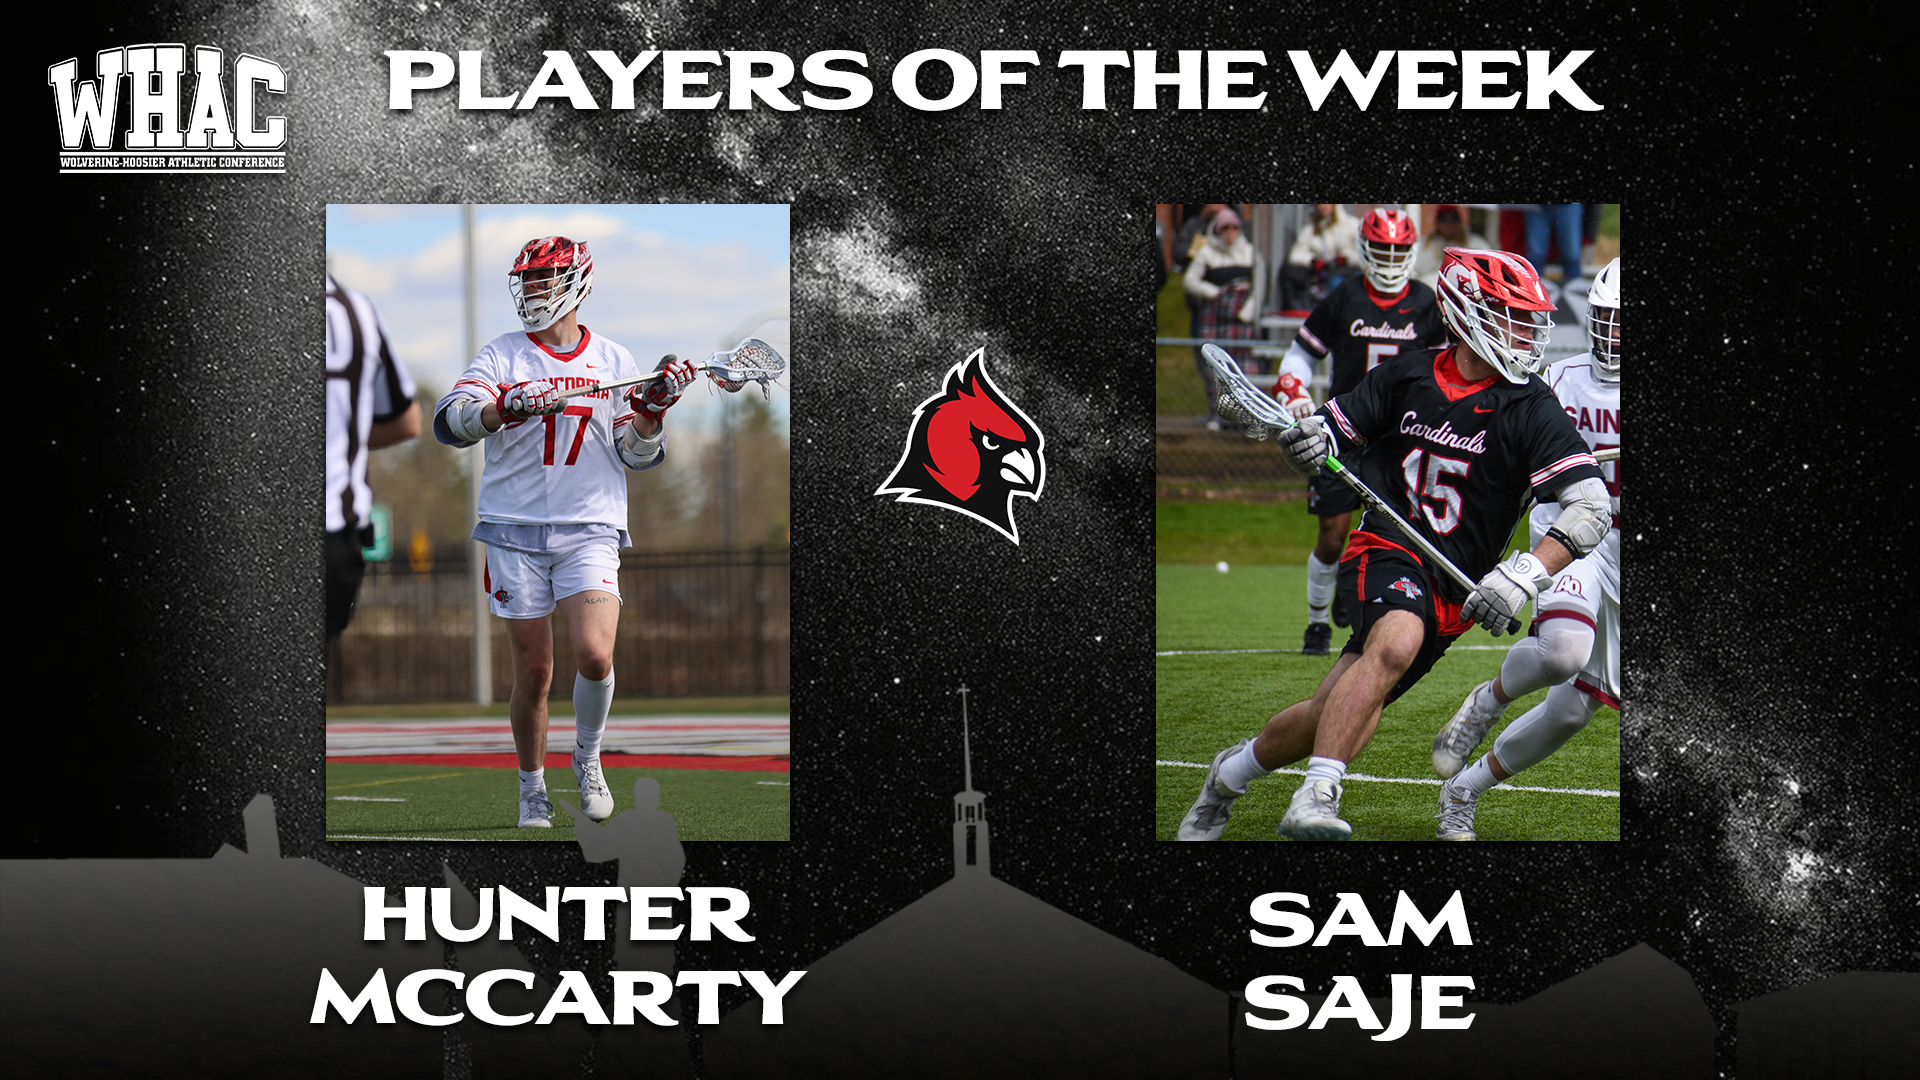 McCarty and Saje sweep WHAC Player of the Week awards